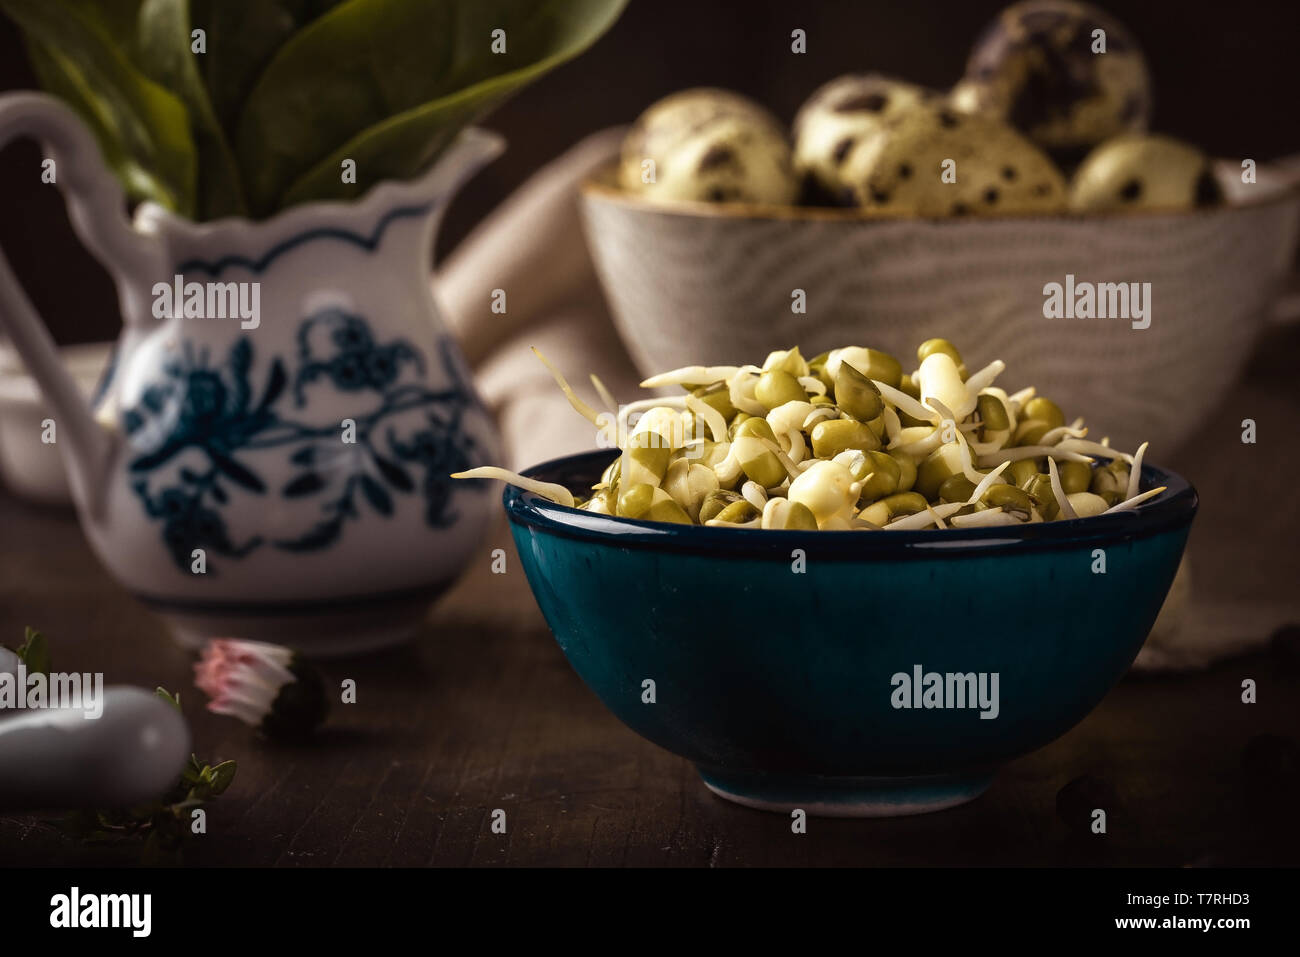 Horizontal photo of vintage wooden board with several bowls which contain mung bean sprouts, quail eggs and spinach. Light cloth is under one bowl. Stock Photo